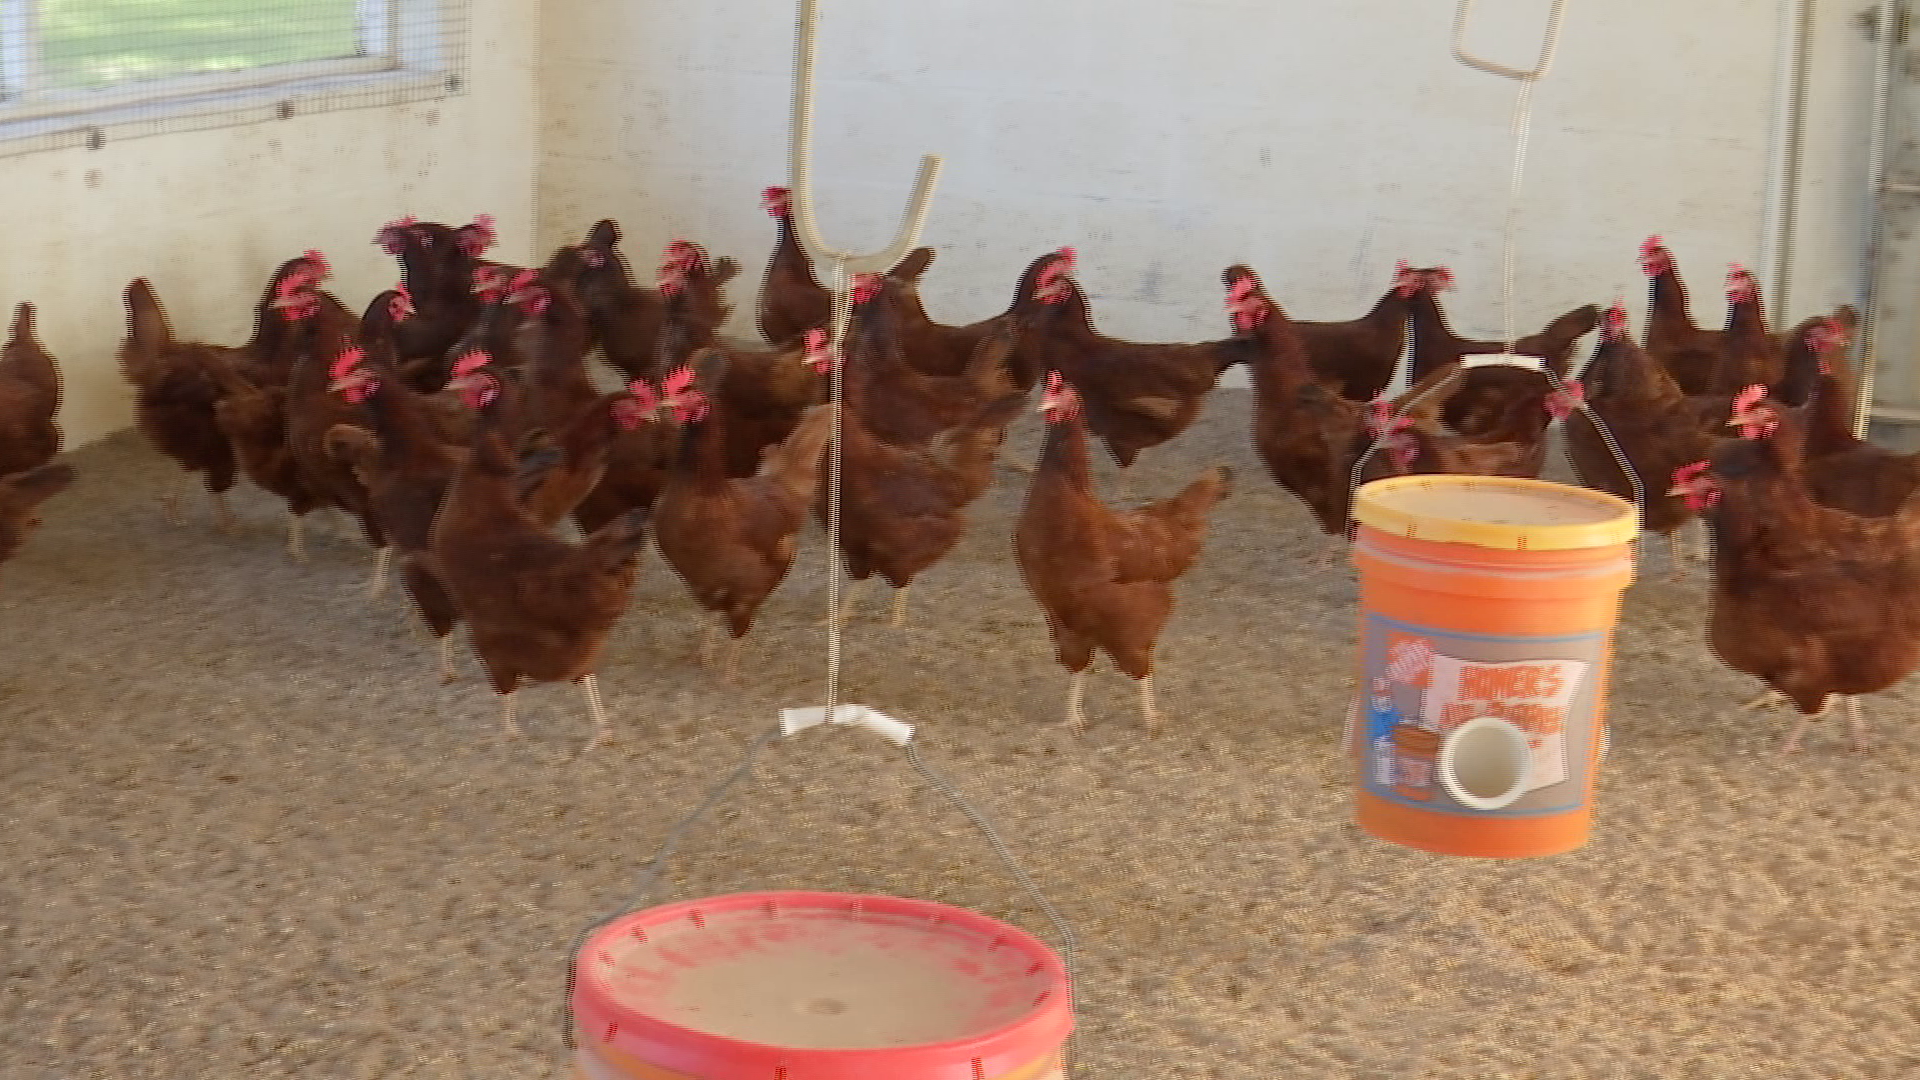 Lee County chickens play crucial role in regulating mosquito-borne diseases